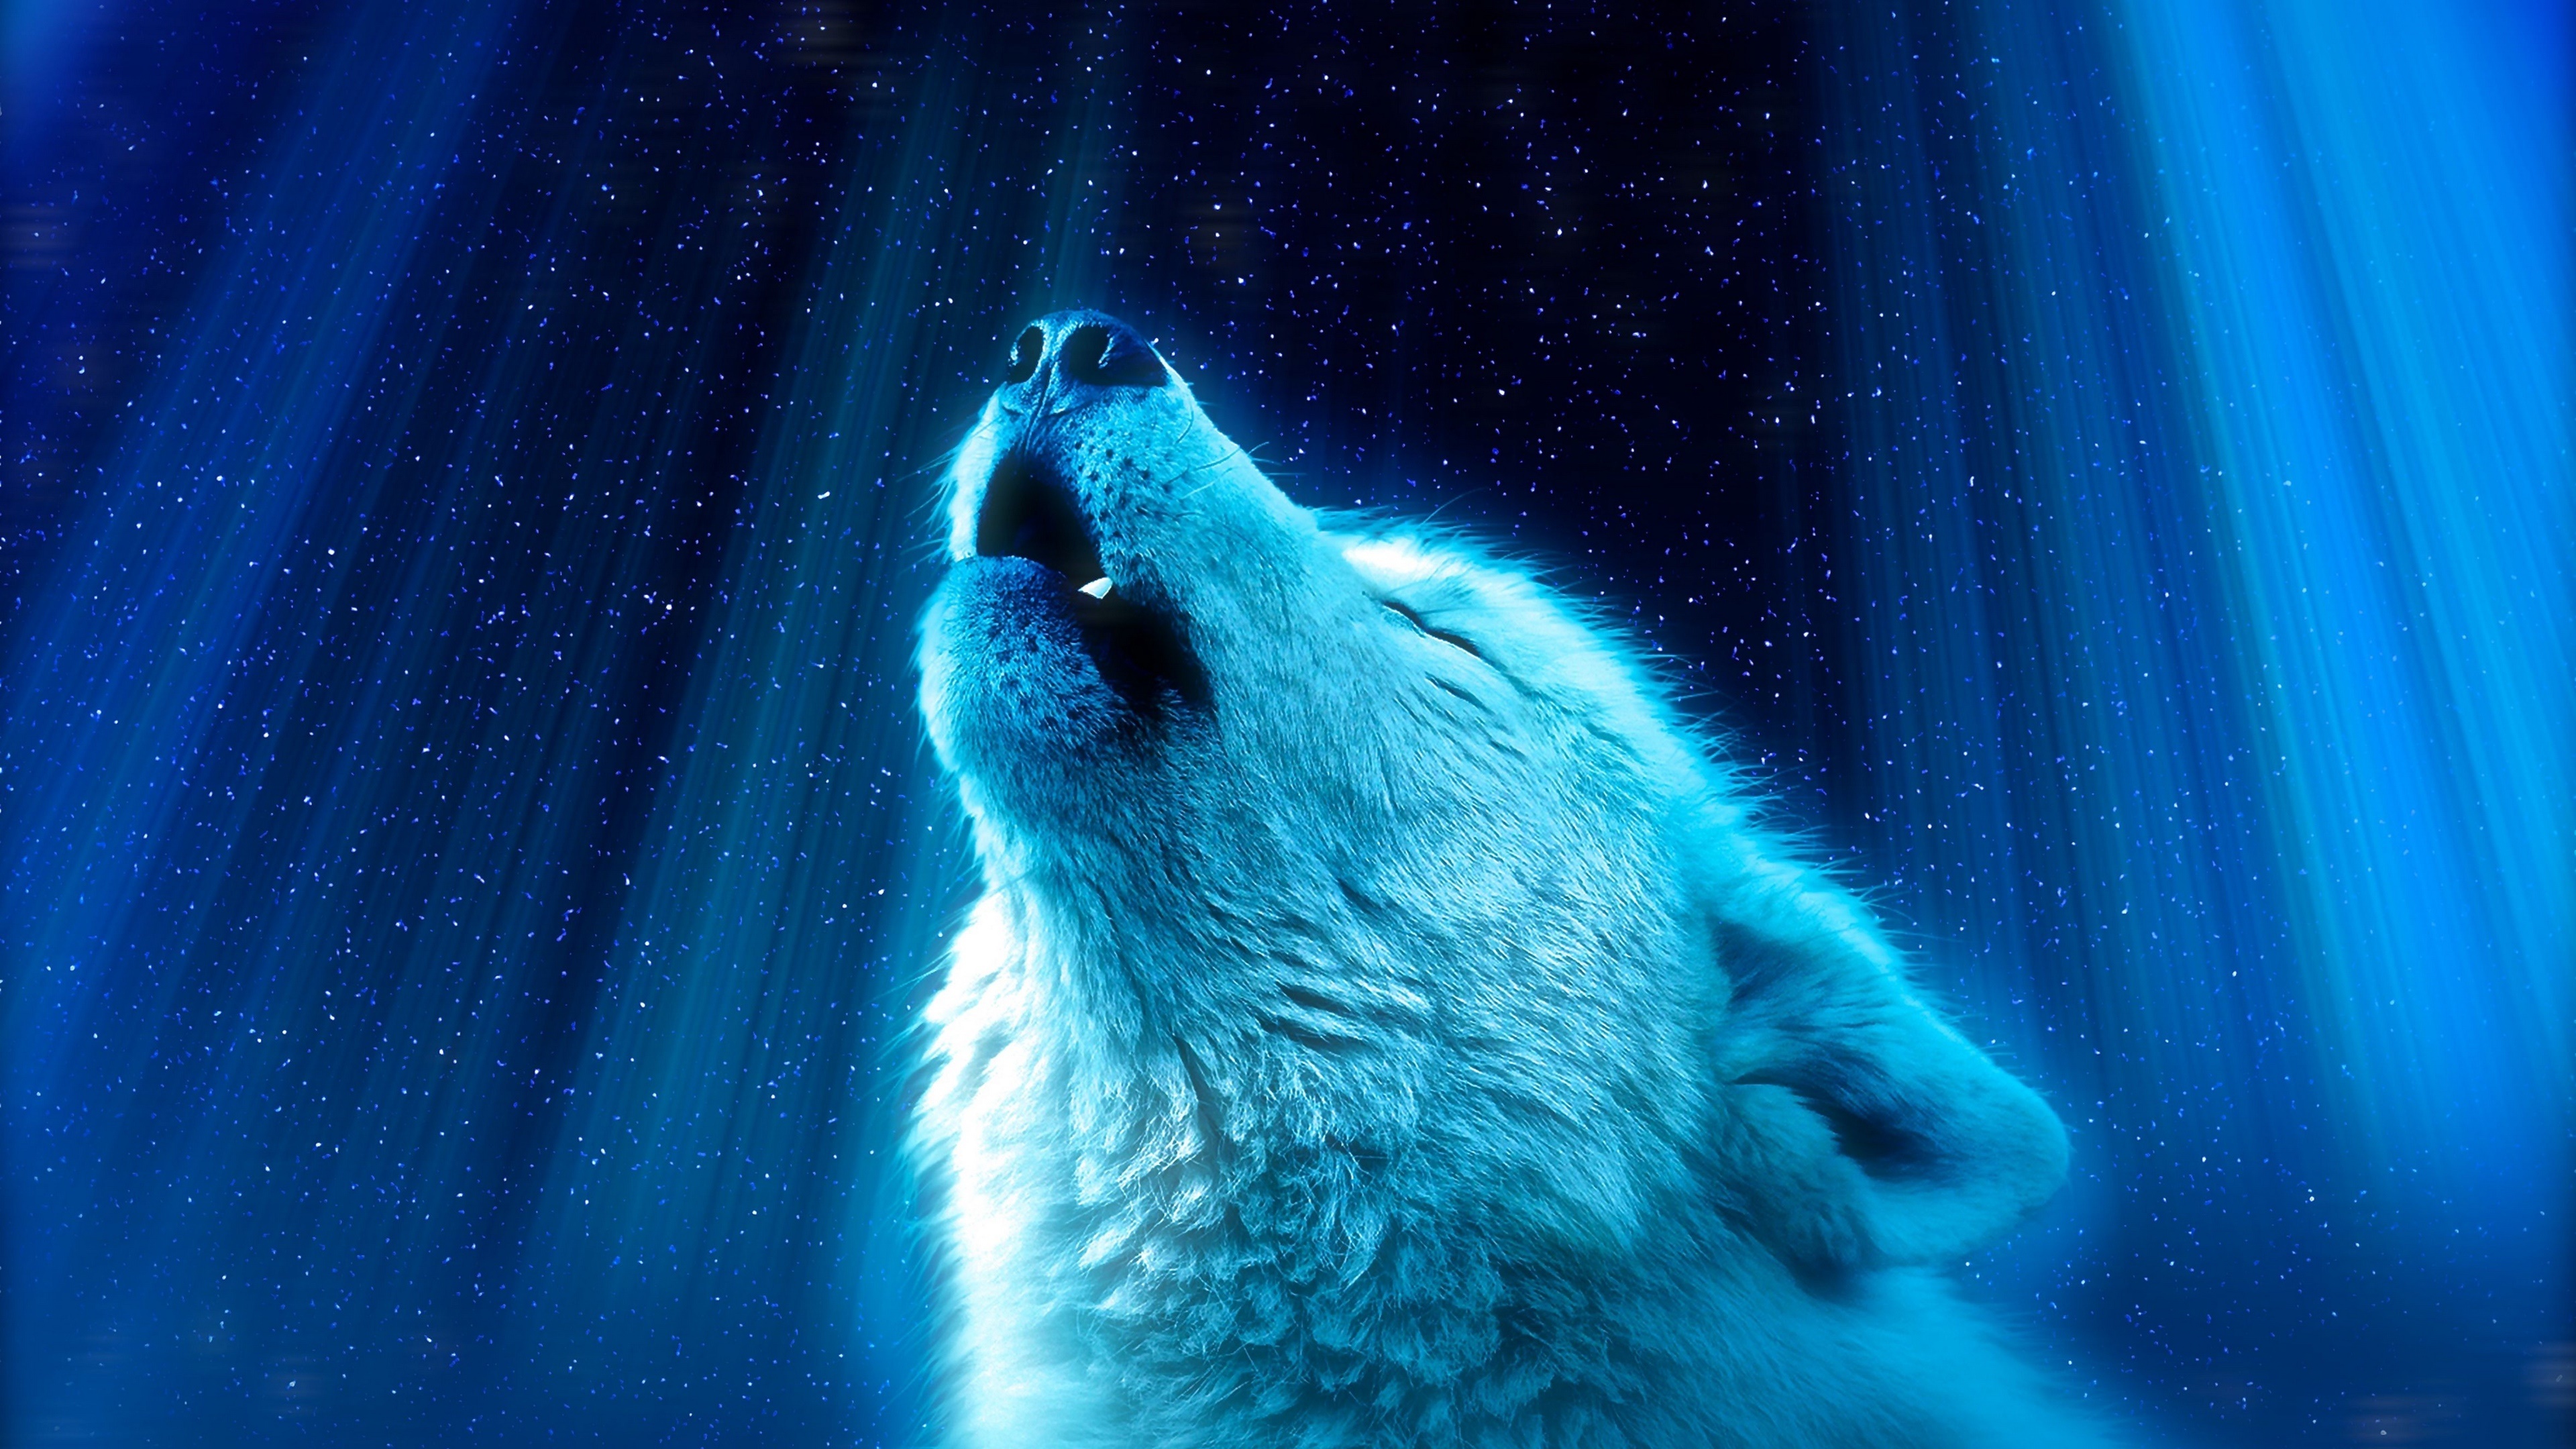 Wolf howling in the starlight wallpaper - backiee 3840x2160